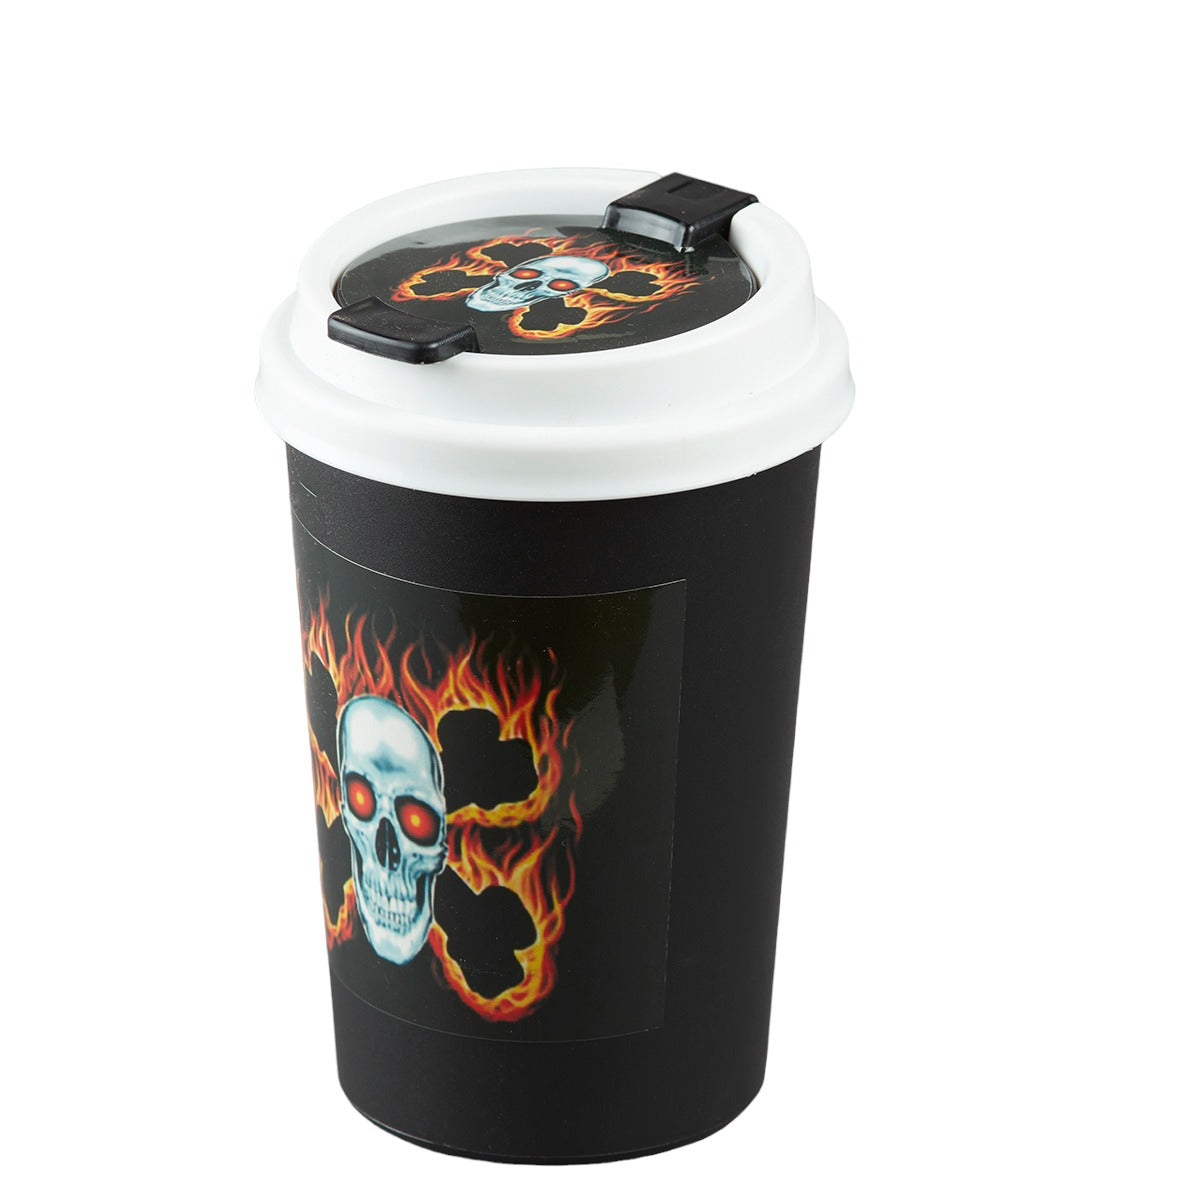 Plastic Car Ashtray Bucket with Lid for Smokers (9790)